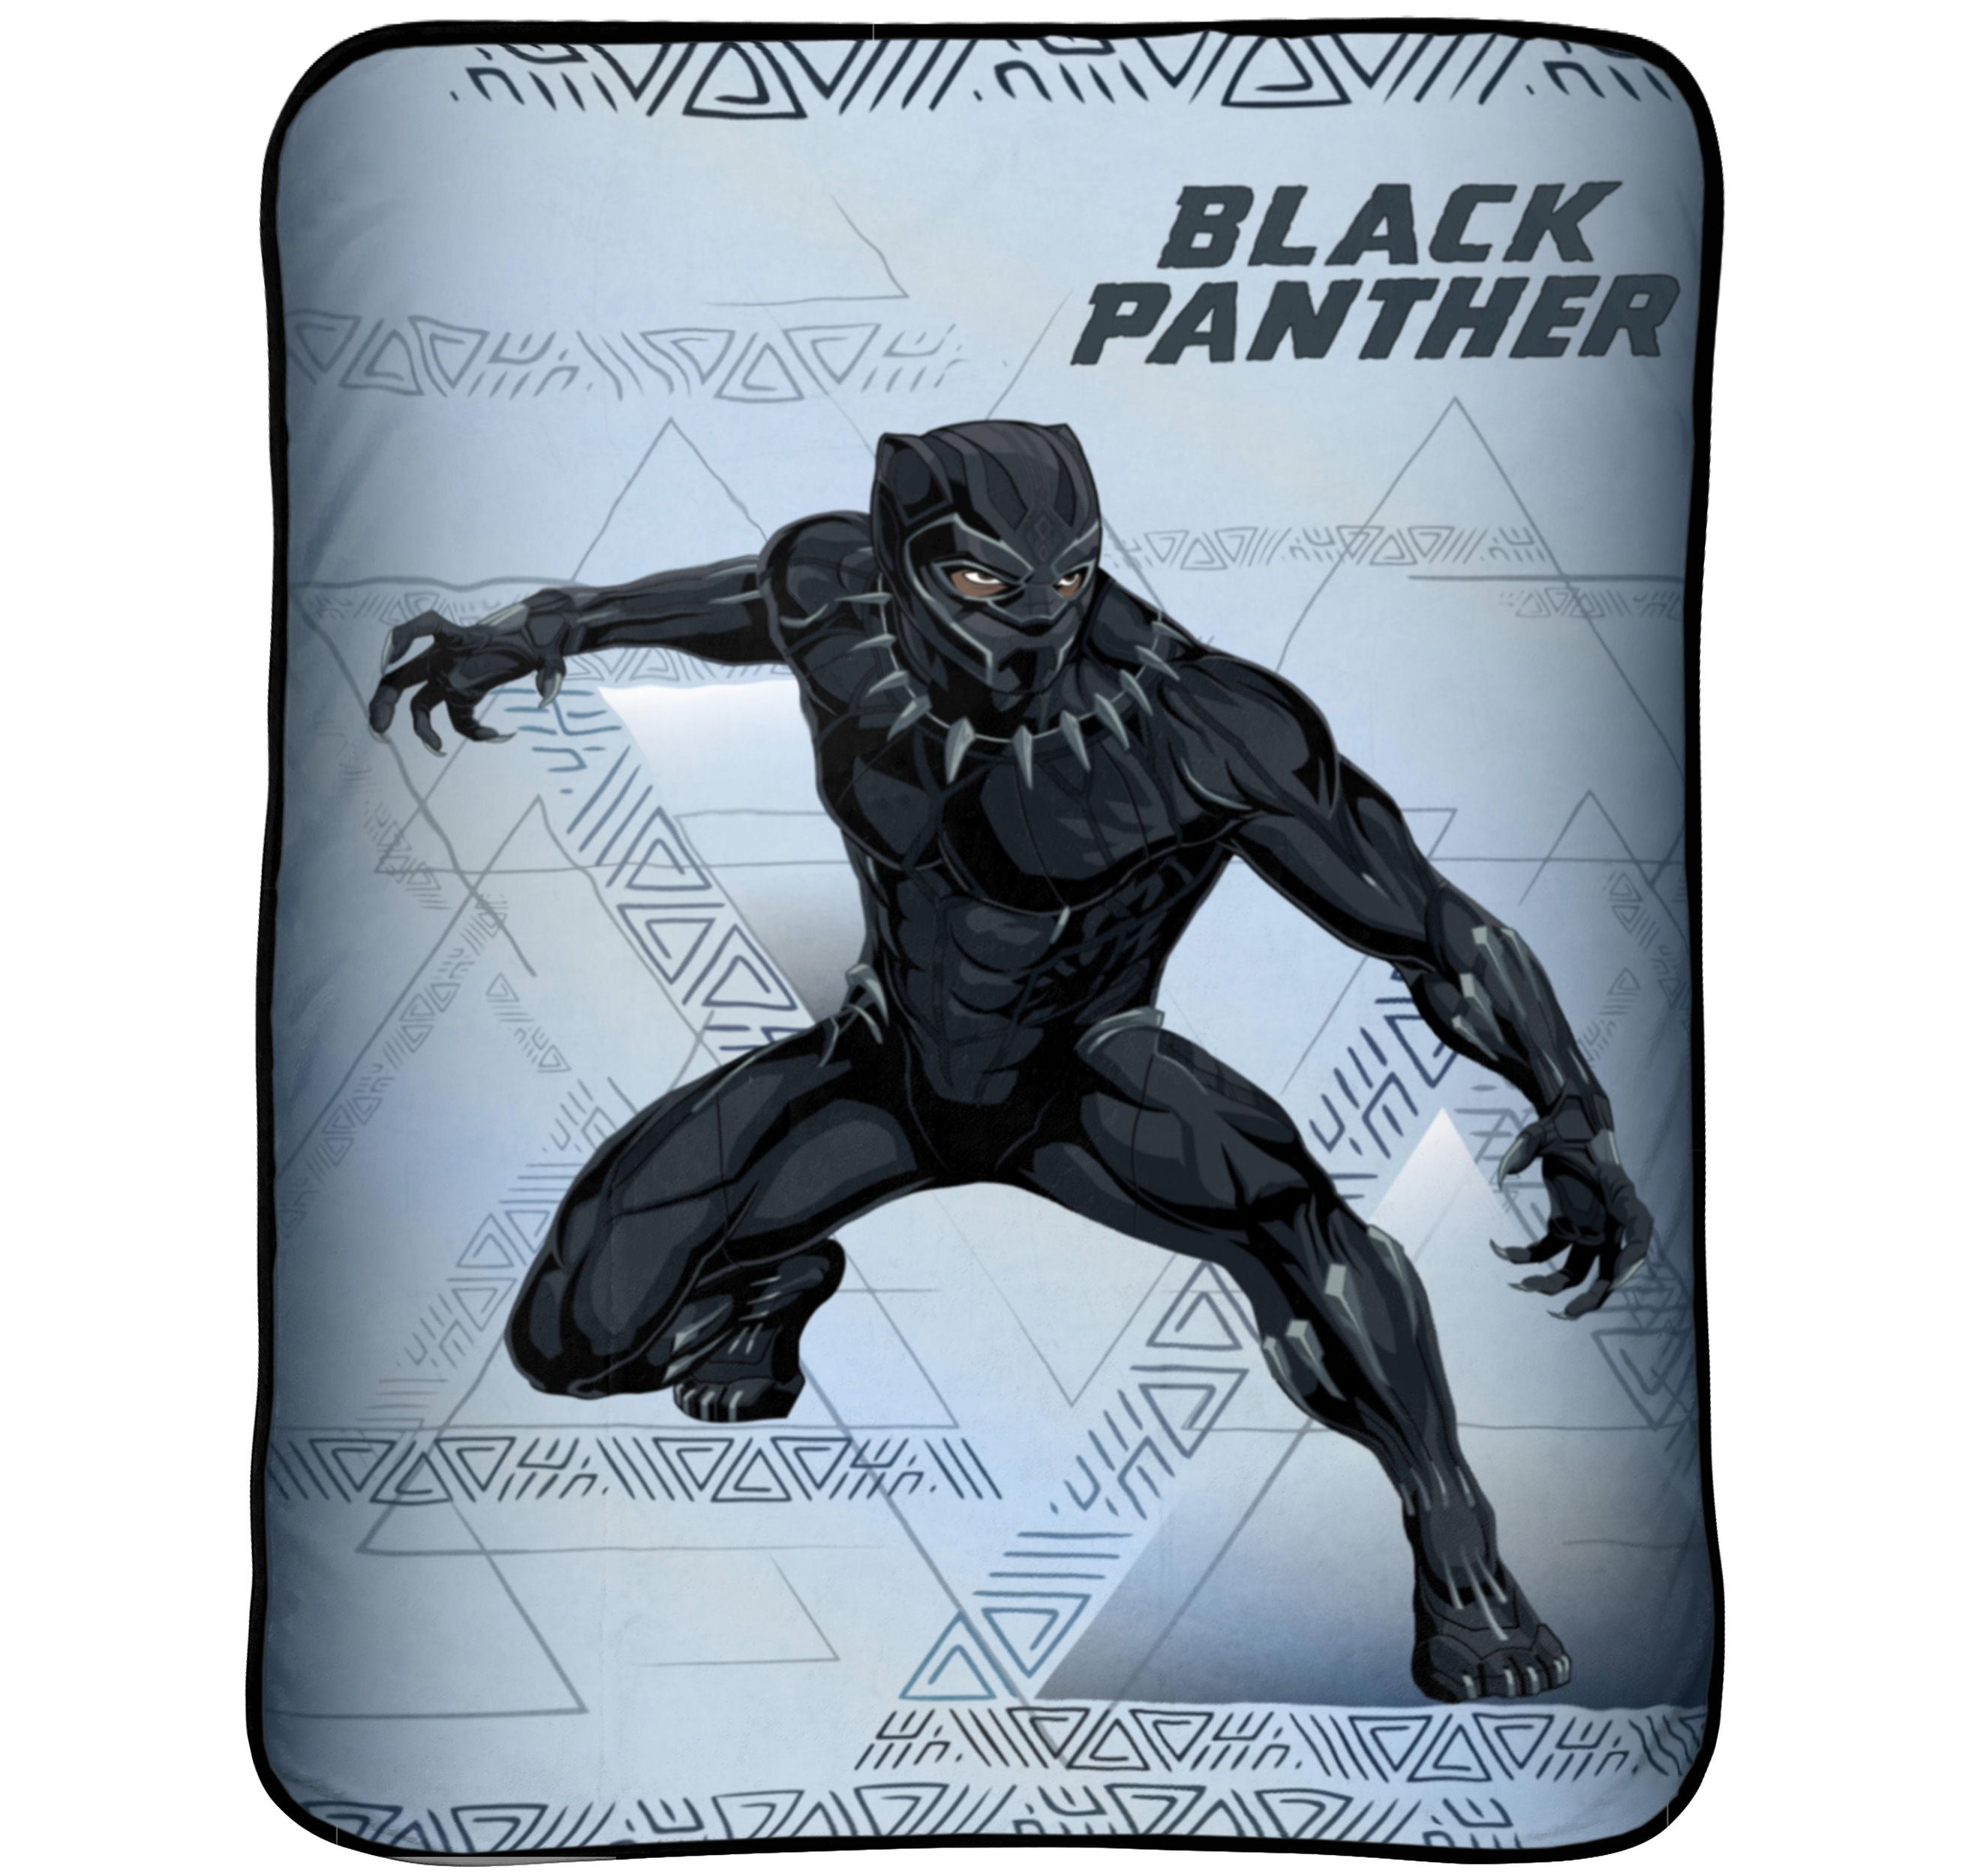 BLACK PANTHER PILLOW 16x20 Inches & THROW BLANKET 40x50 Inches Marvel Comics Set 